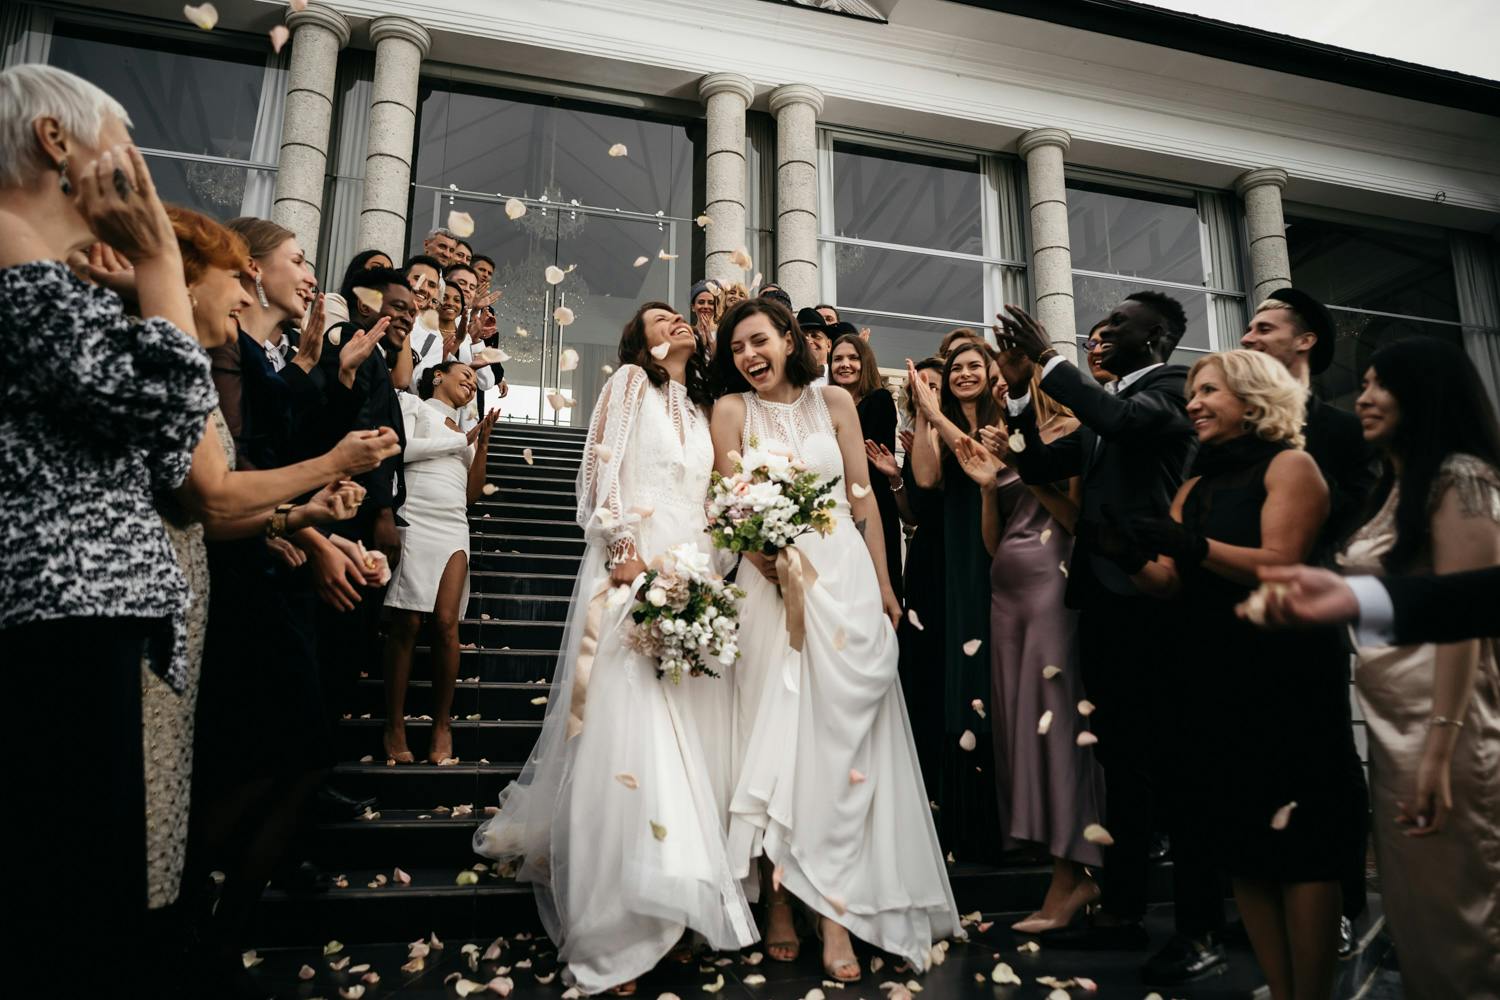 Two brides exit church excited after their wedding, guests smile and cheer for them